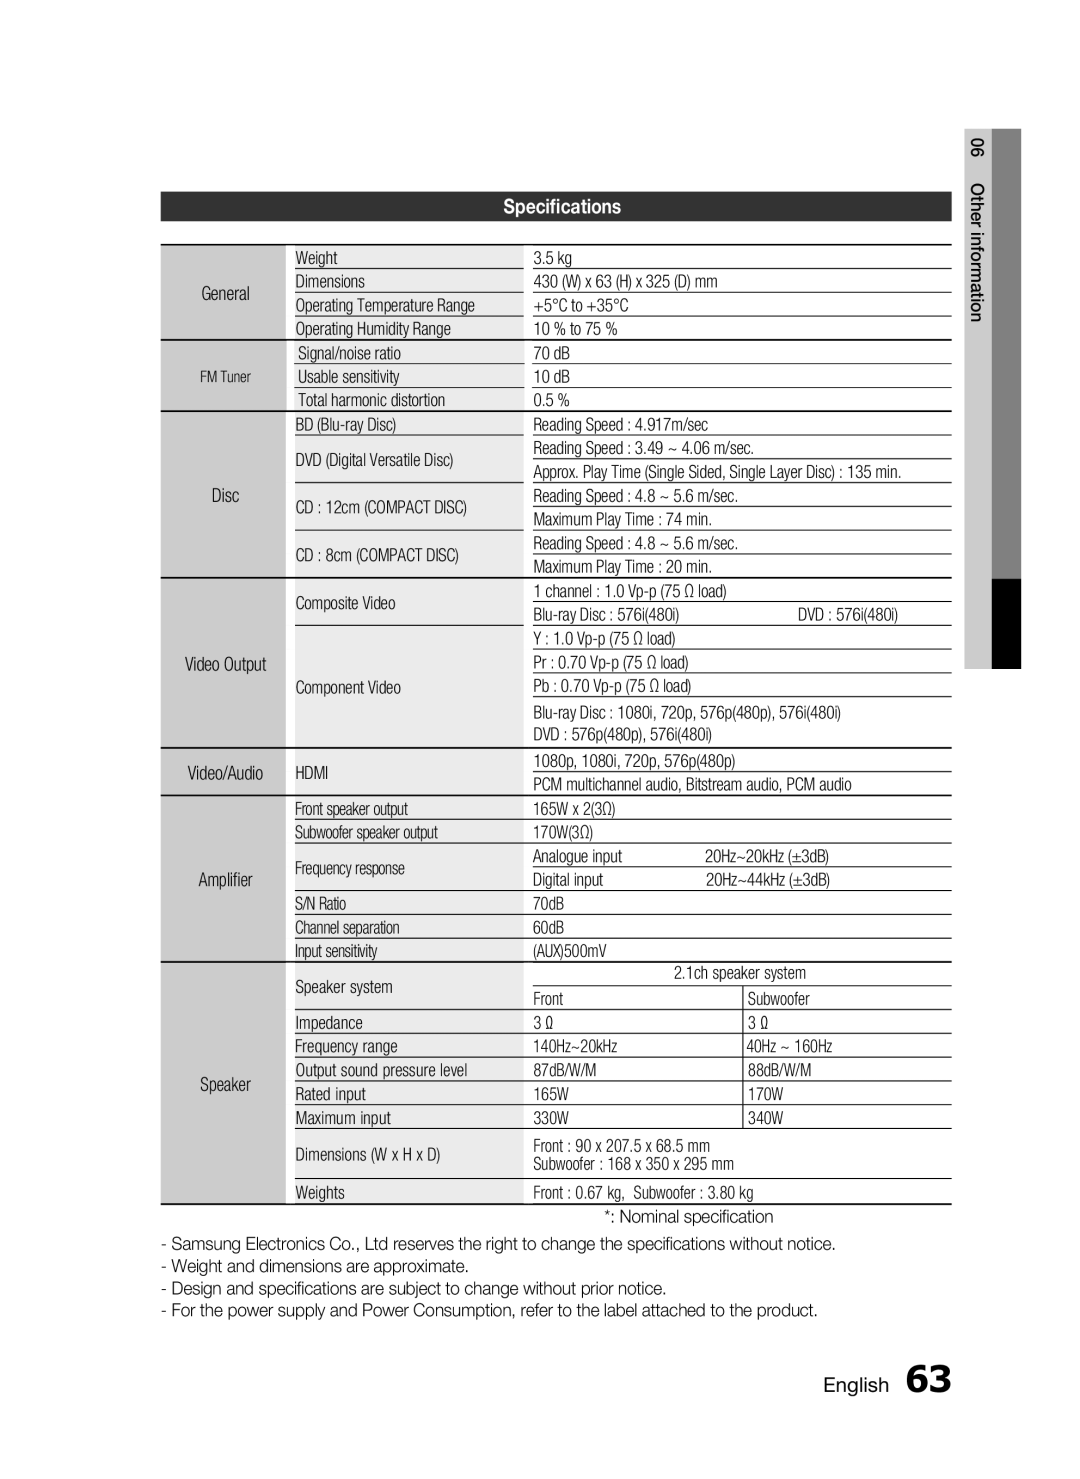 Samsung HT-C5200 user manual Speciﬁcations, English 